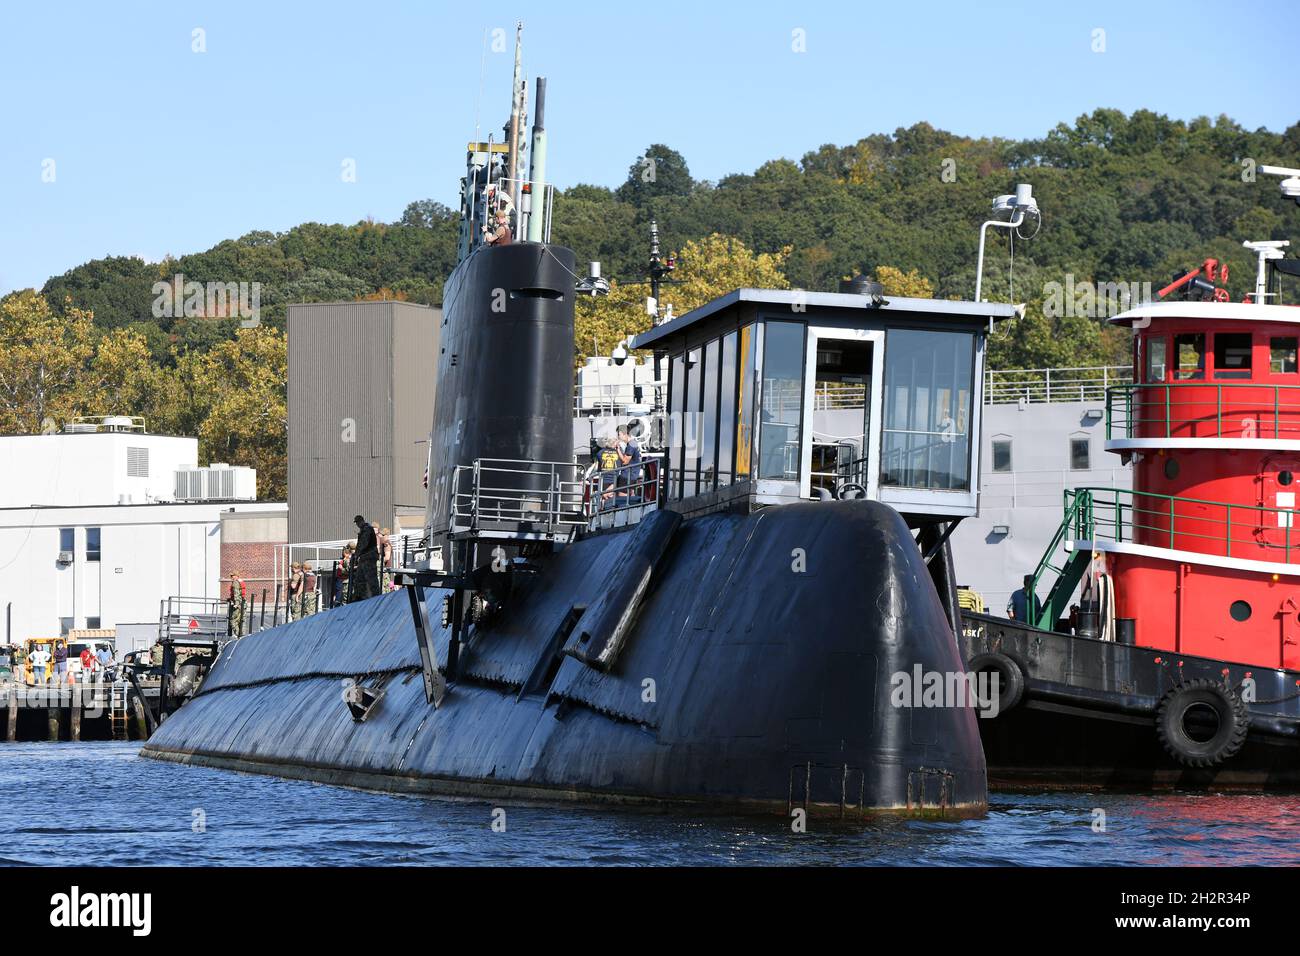 Nautilus, world's first nuclear submarine, to reopen after $36